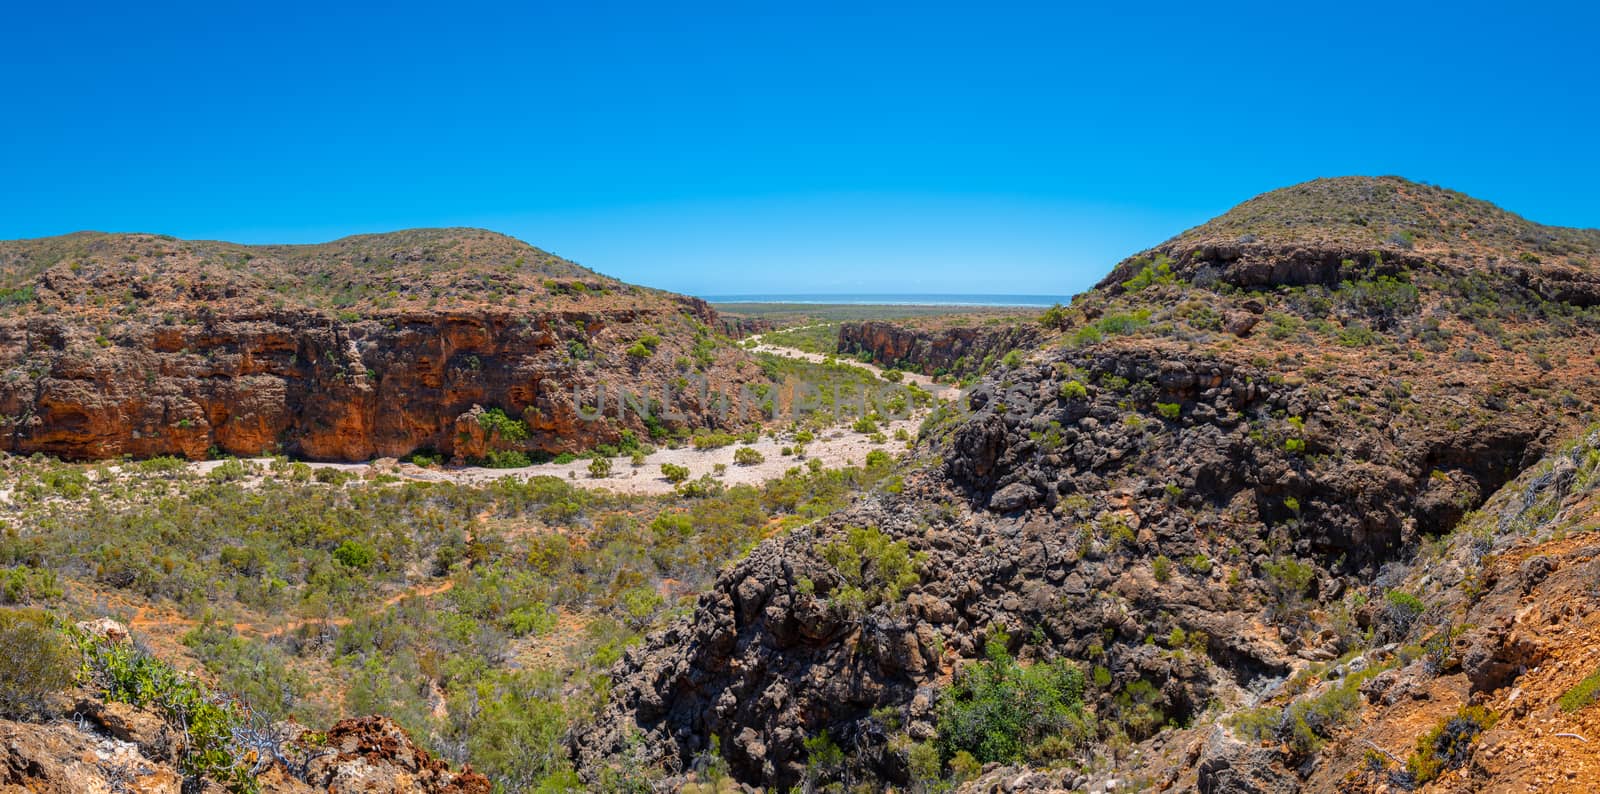 Mandu Mandu Gorge with dry river bed leading into Indian Ocean at Cape Range National Park Australia by MXW_Stock